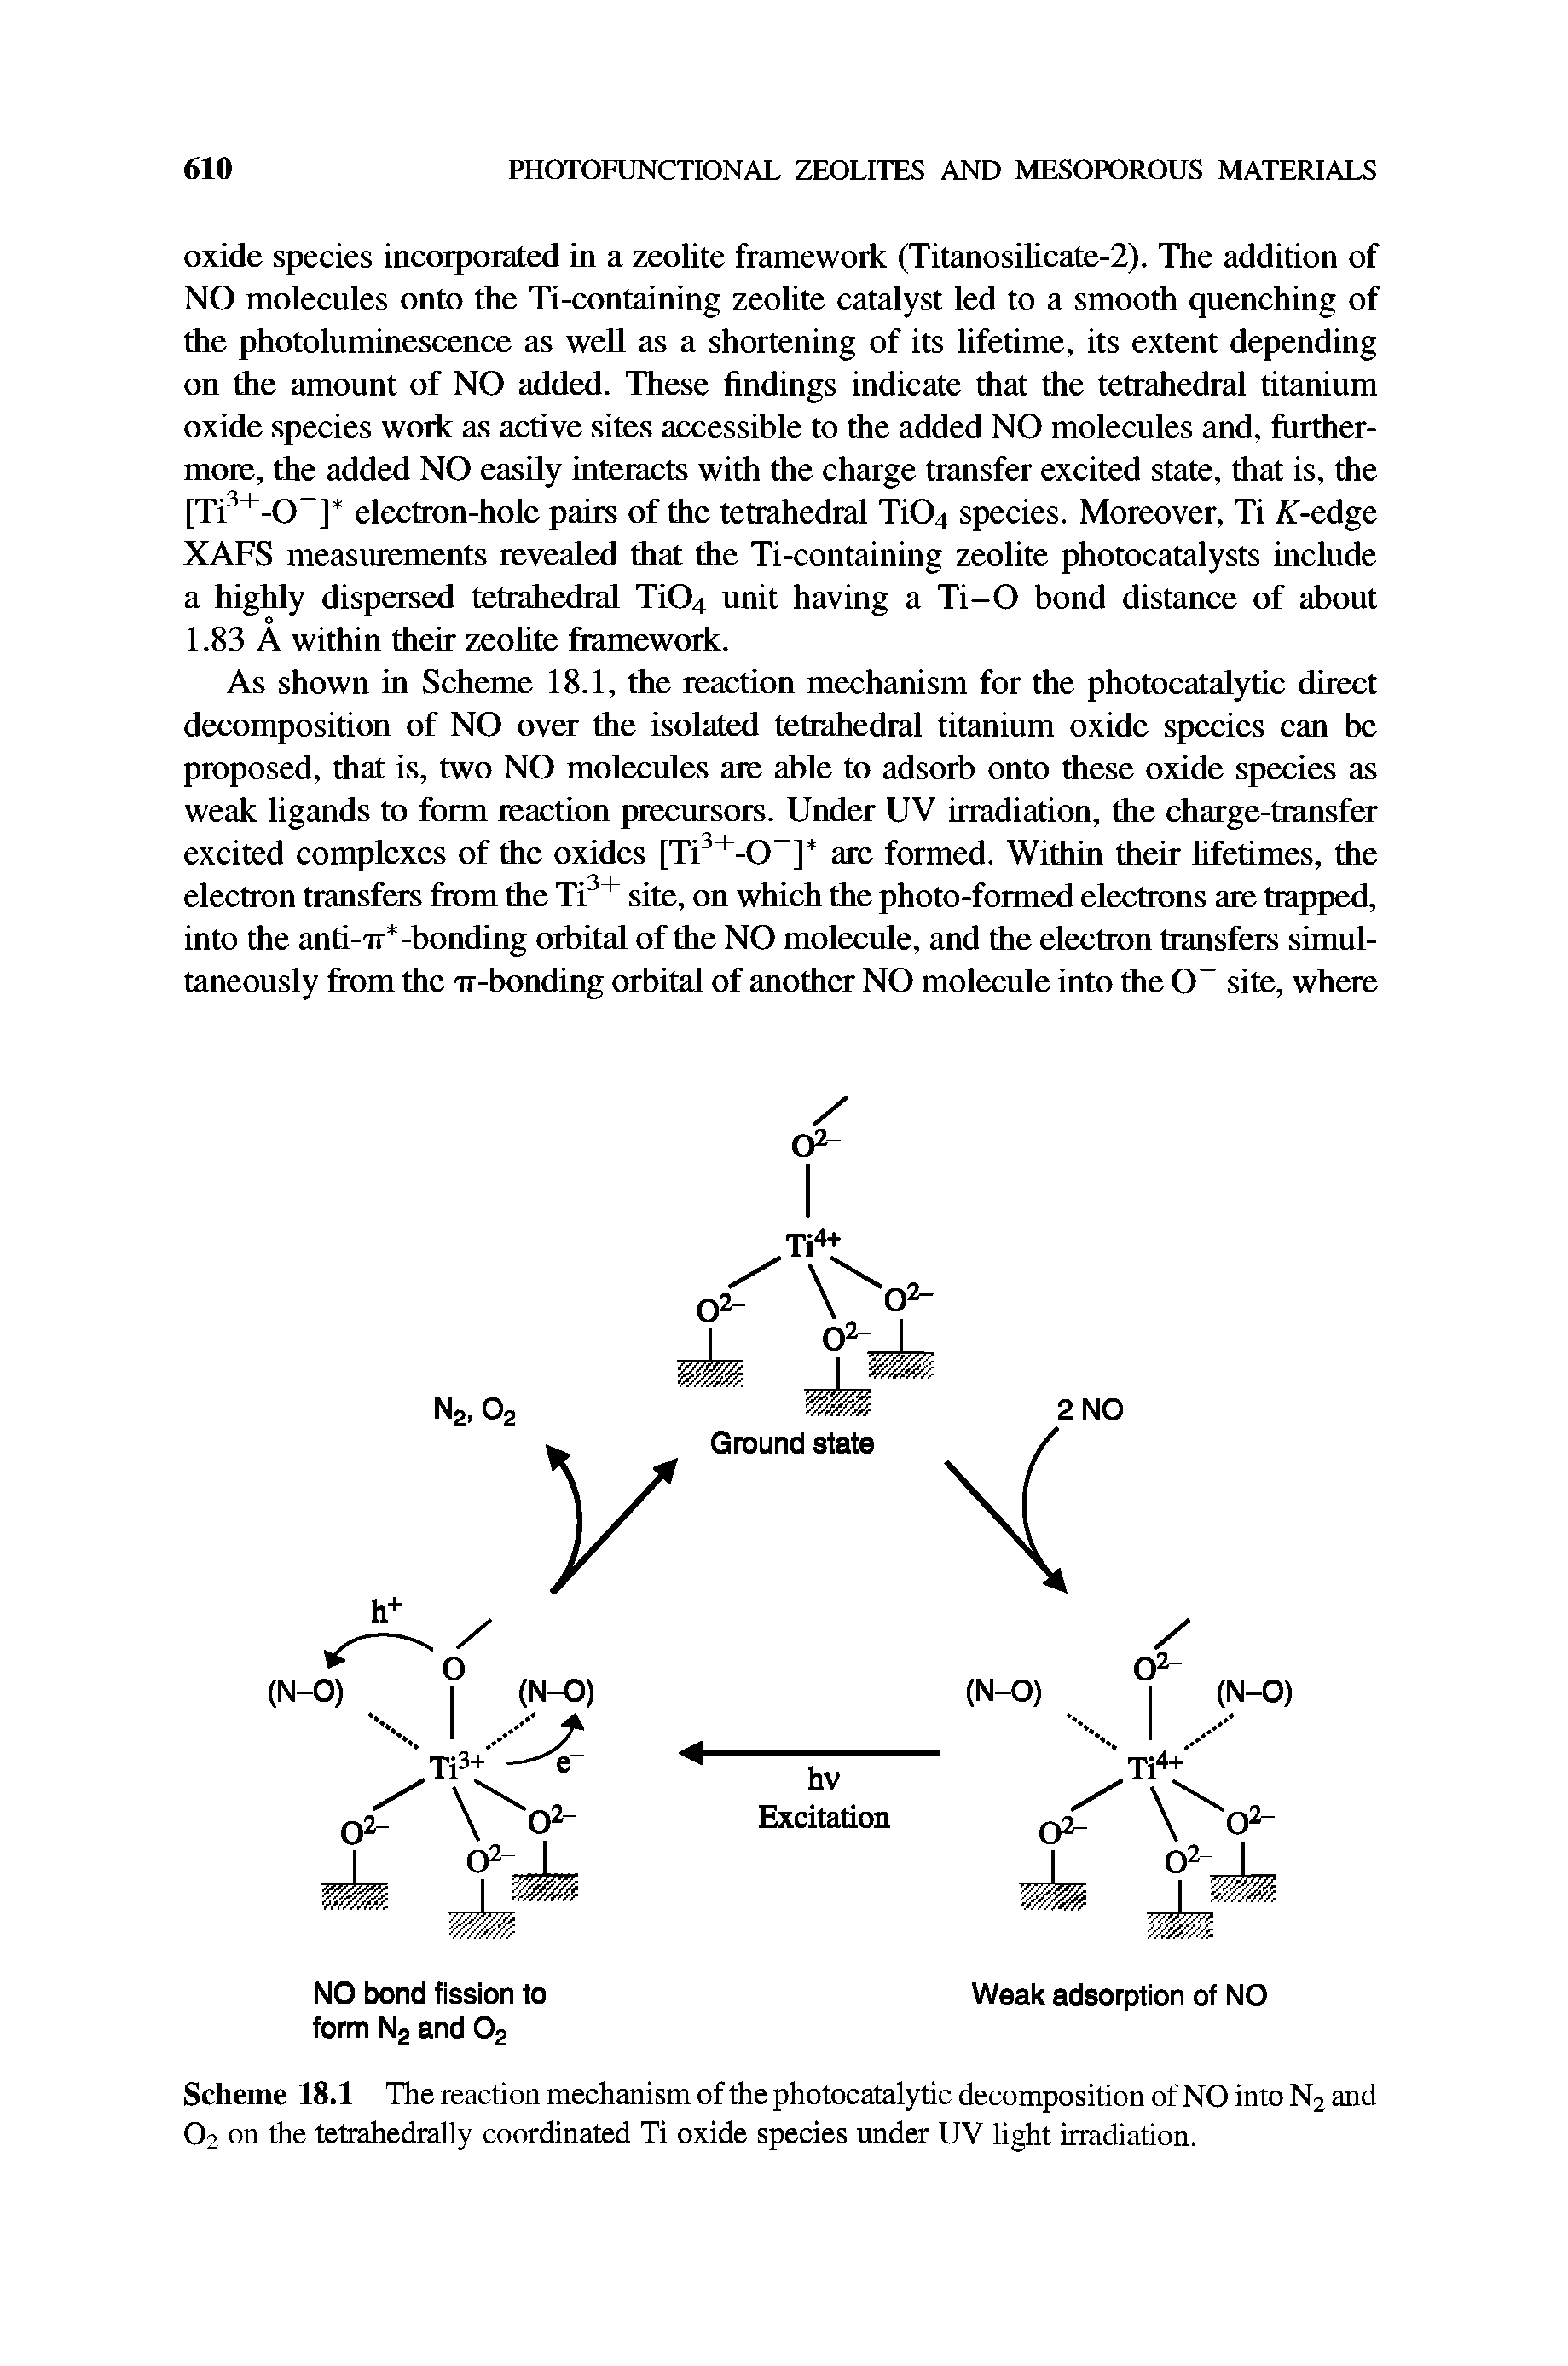 Scheme 18.1 The reaction mechanism of the photocatalytic decomposition of NO into N2 and O2 on the tetrahedrally coordinated Ti oxide species under UV light irradiation.